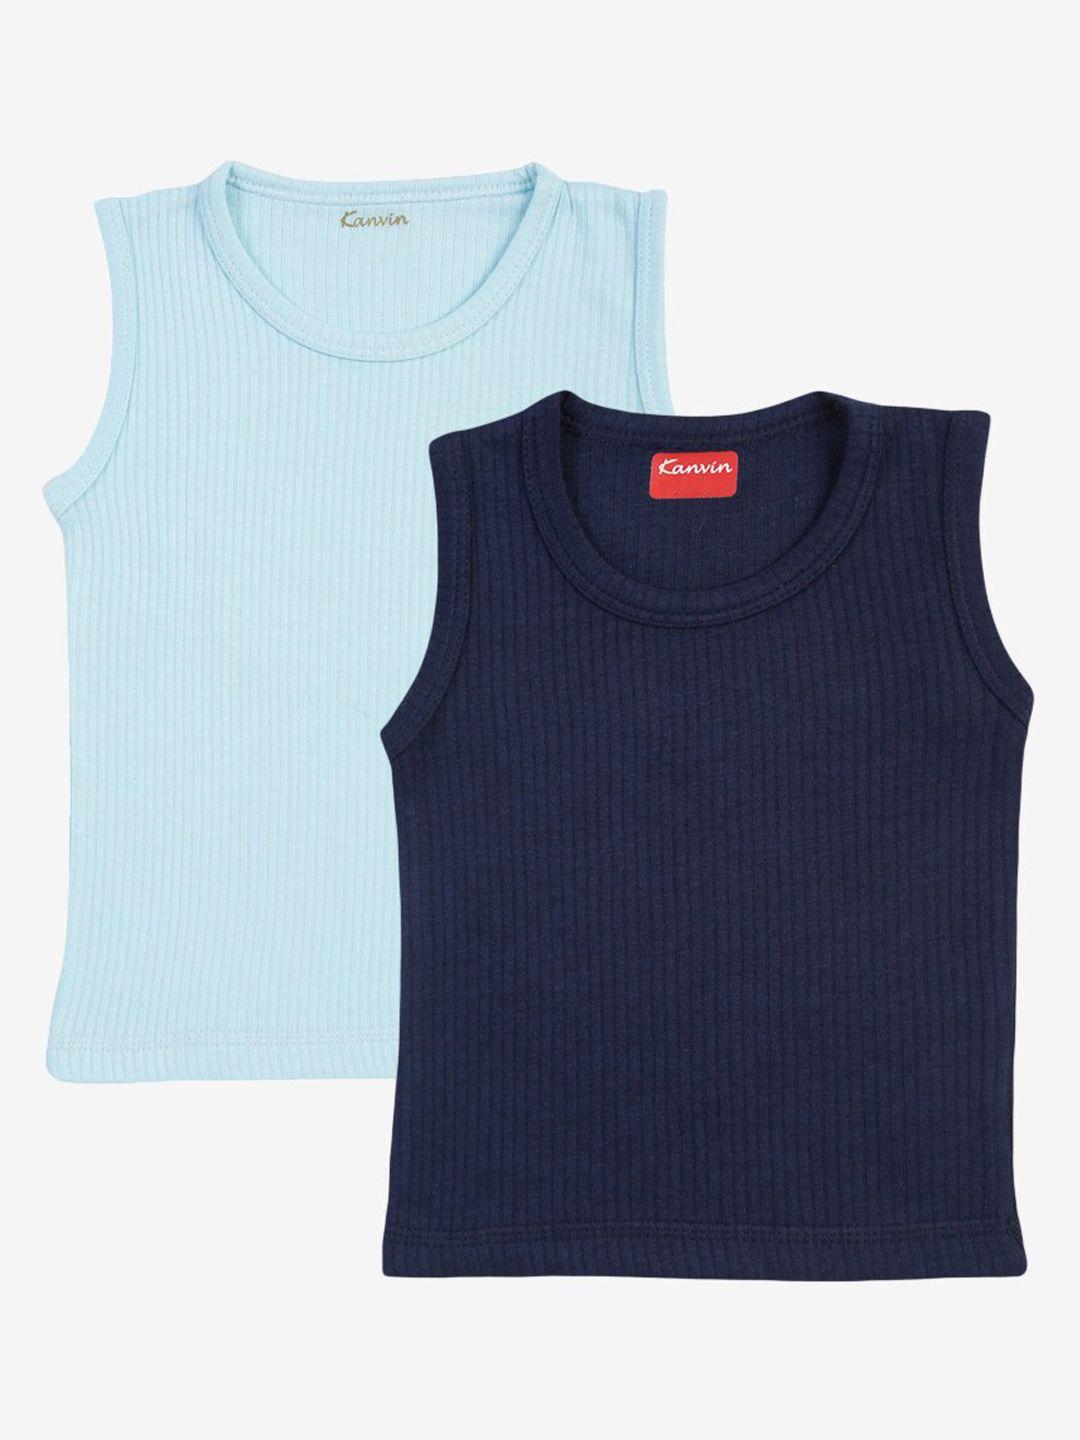 kanvin boys pack of 2 turquoise & navy blue ribbed cotton thermal tops